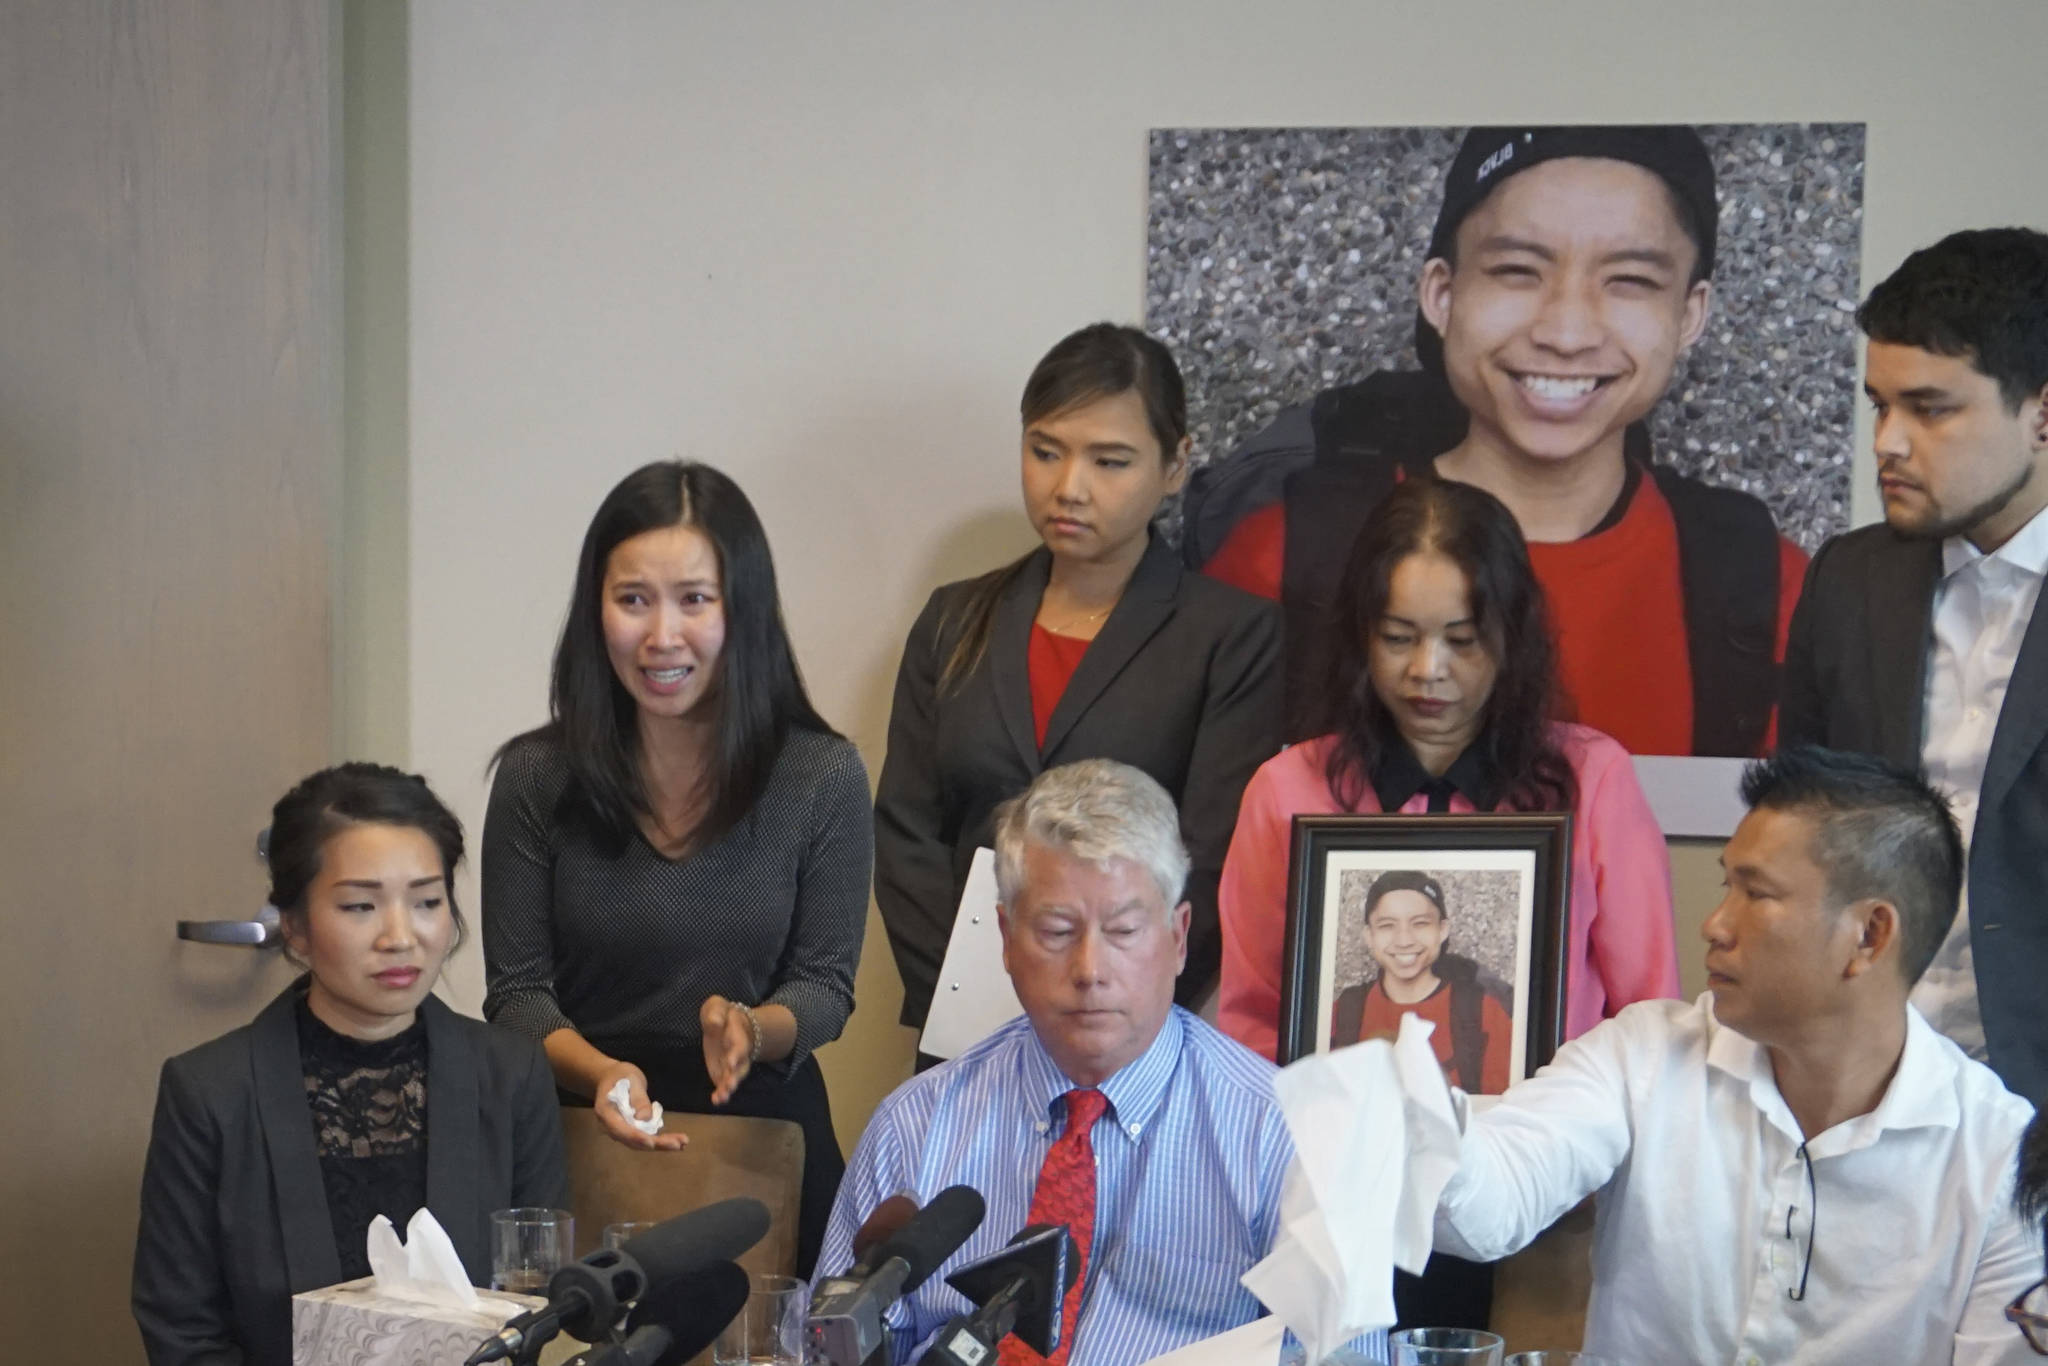 Tommy Le’s family, joined by their lawyers, discuss autopsy results. Photo by Daniel Person